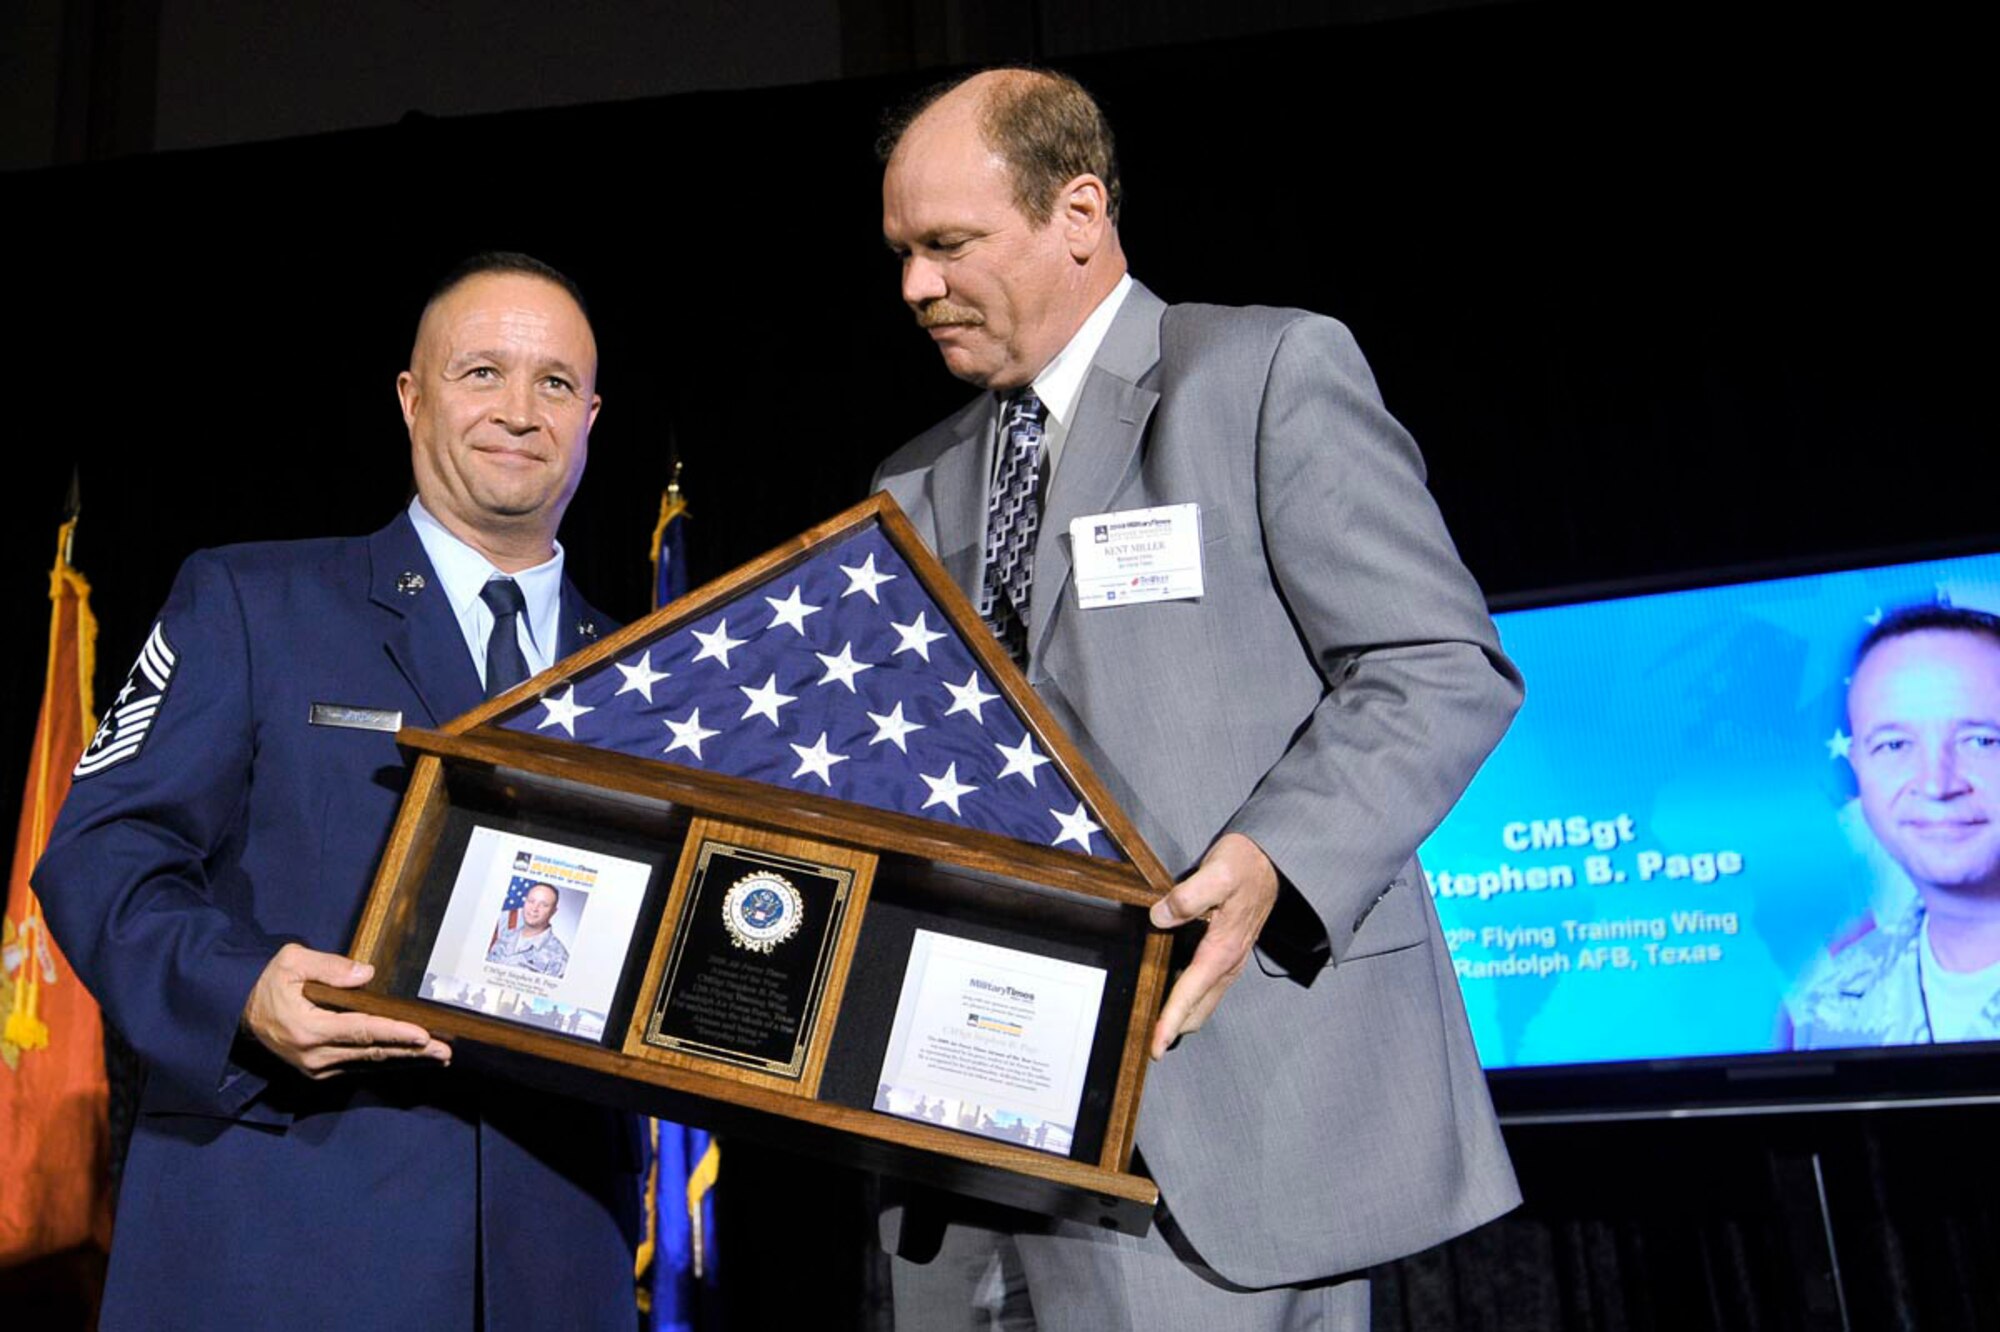 Chief Master Sgt. Stephen Page accepts the Air Force Times newspaper's Airman of the Year award.  Presenting the award is Kent Miller from the Military Times newspaper group at an awards reception July 30 in Washington, D.C. (U.S. Air Force photo by Scott M. Ash)